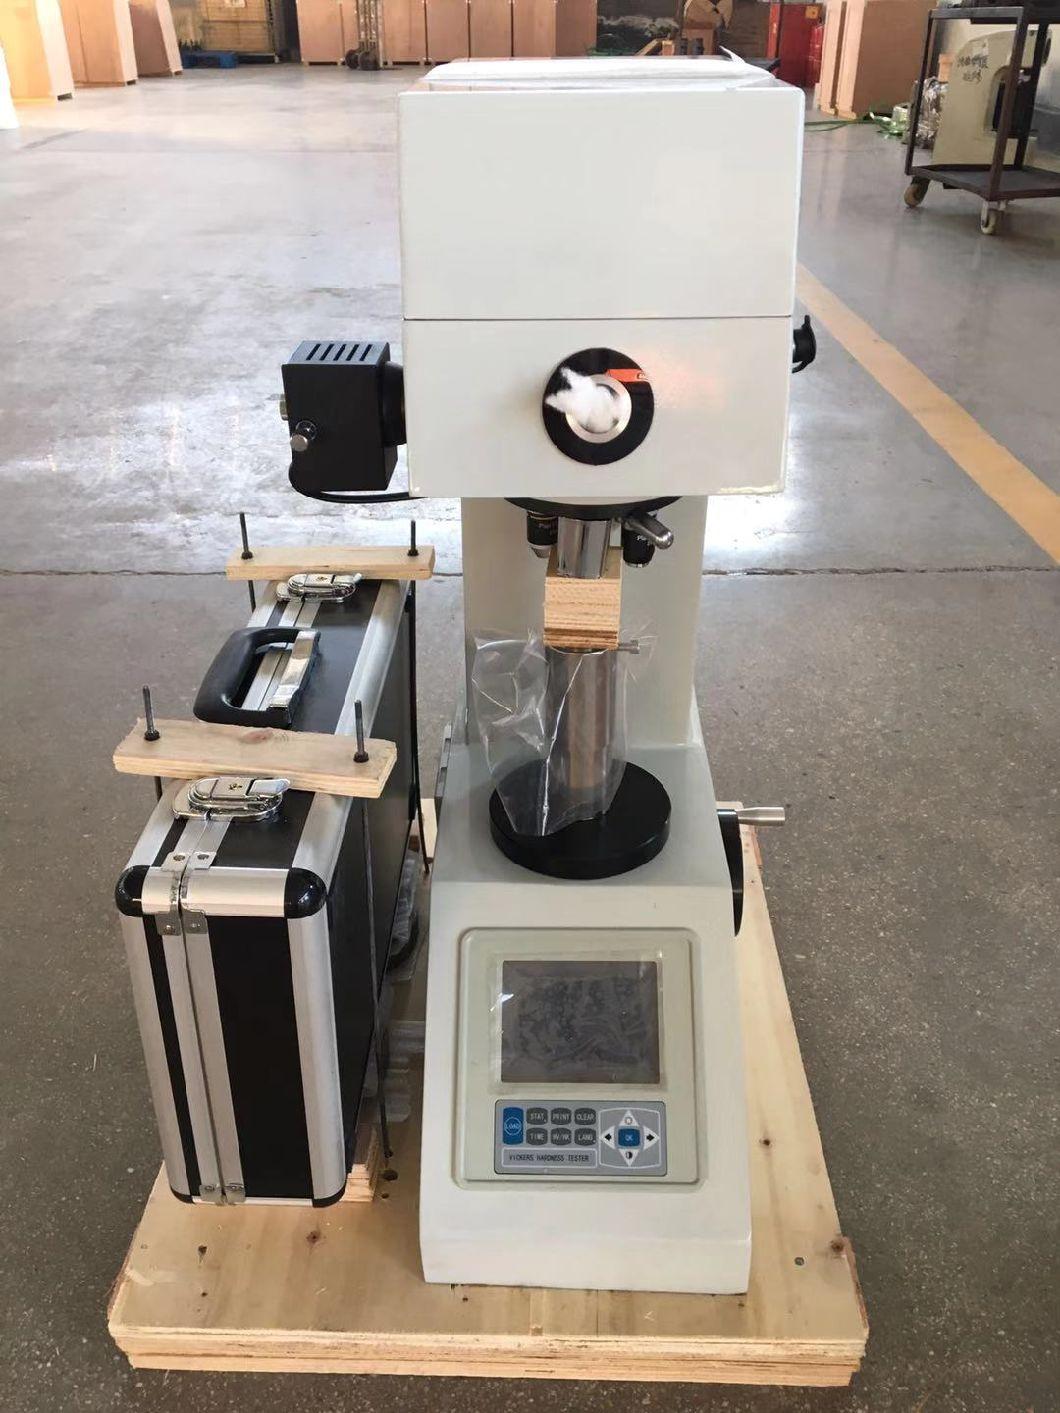 200HV-5 Professional Supplier Offer Portable Vicker′s Hardness Testing Machine Excellent Quality